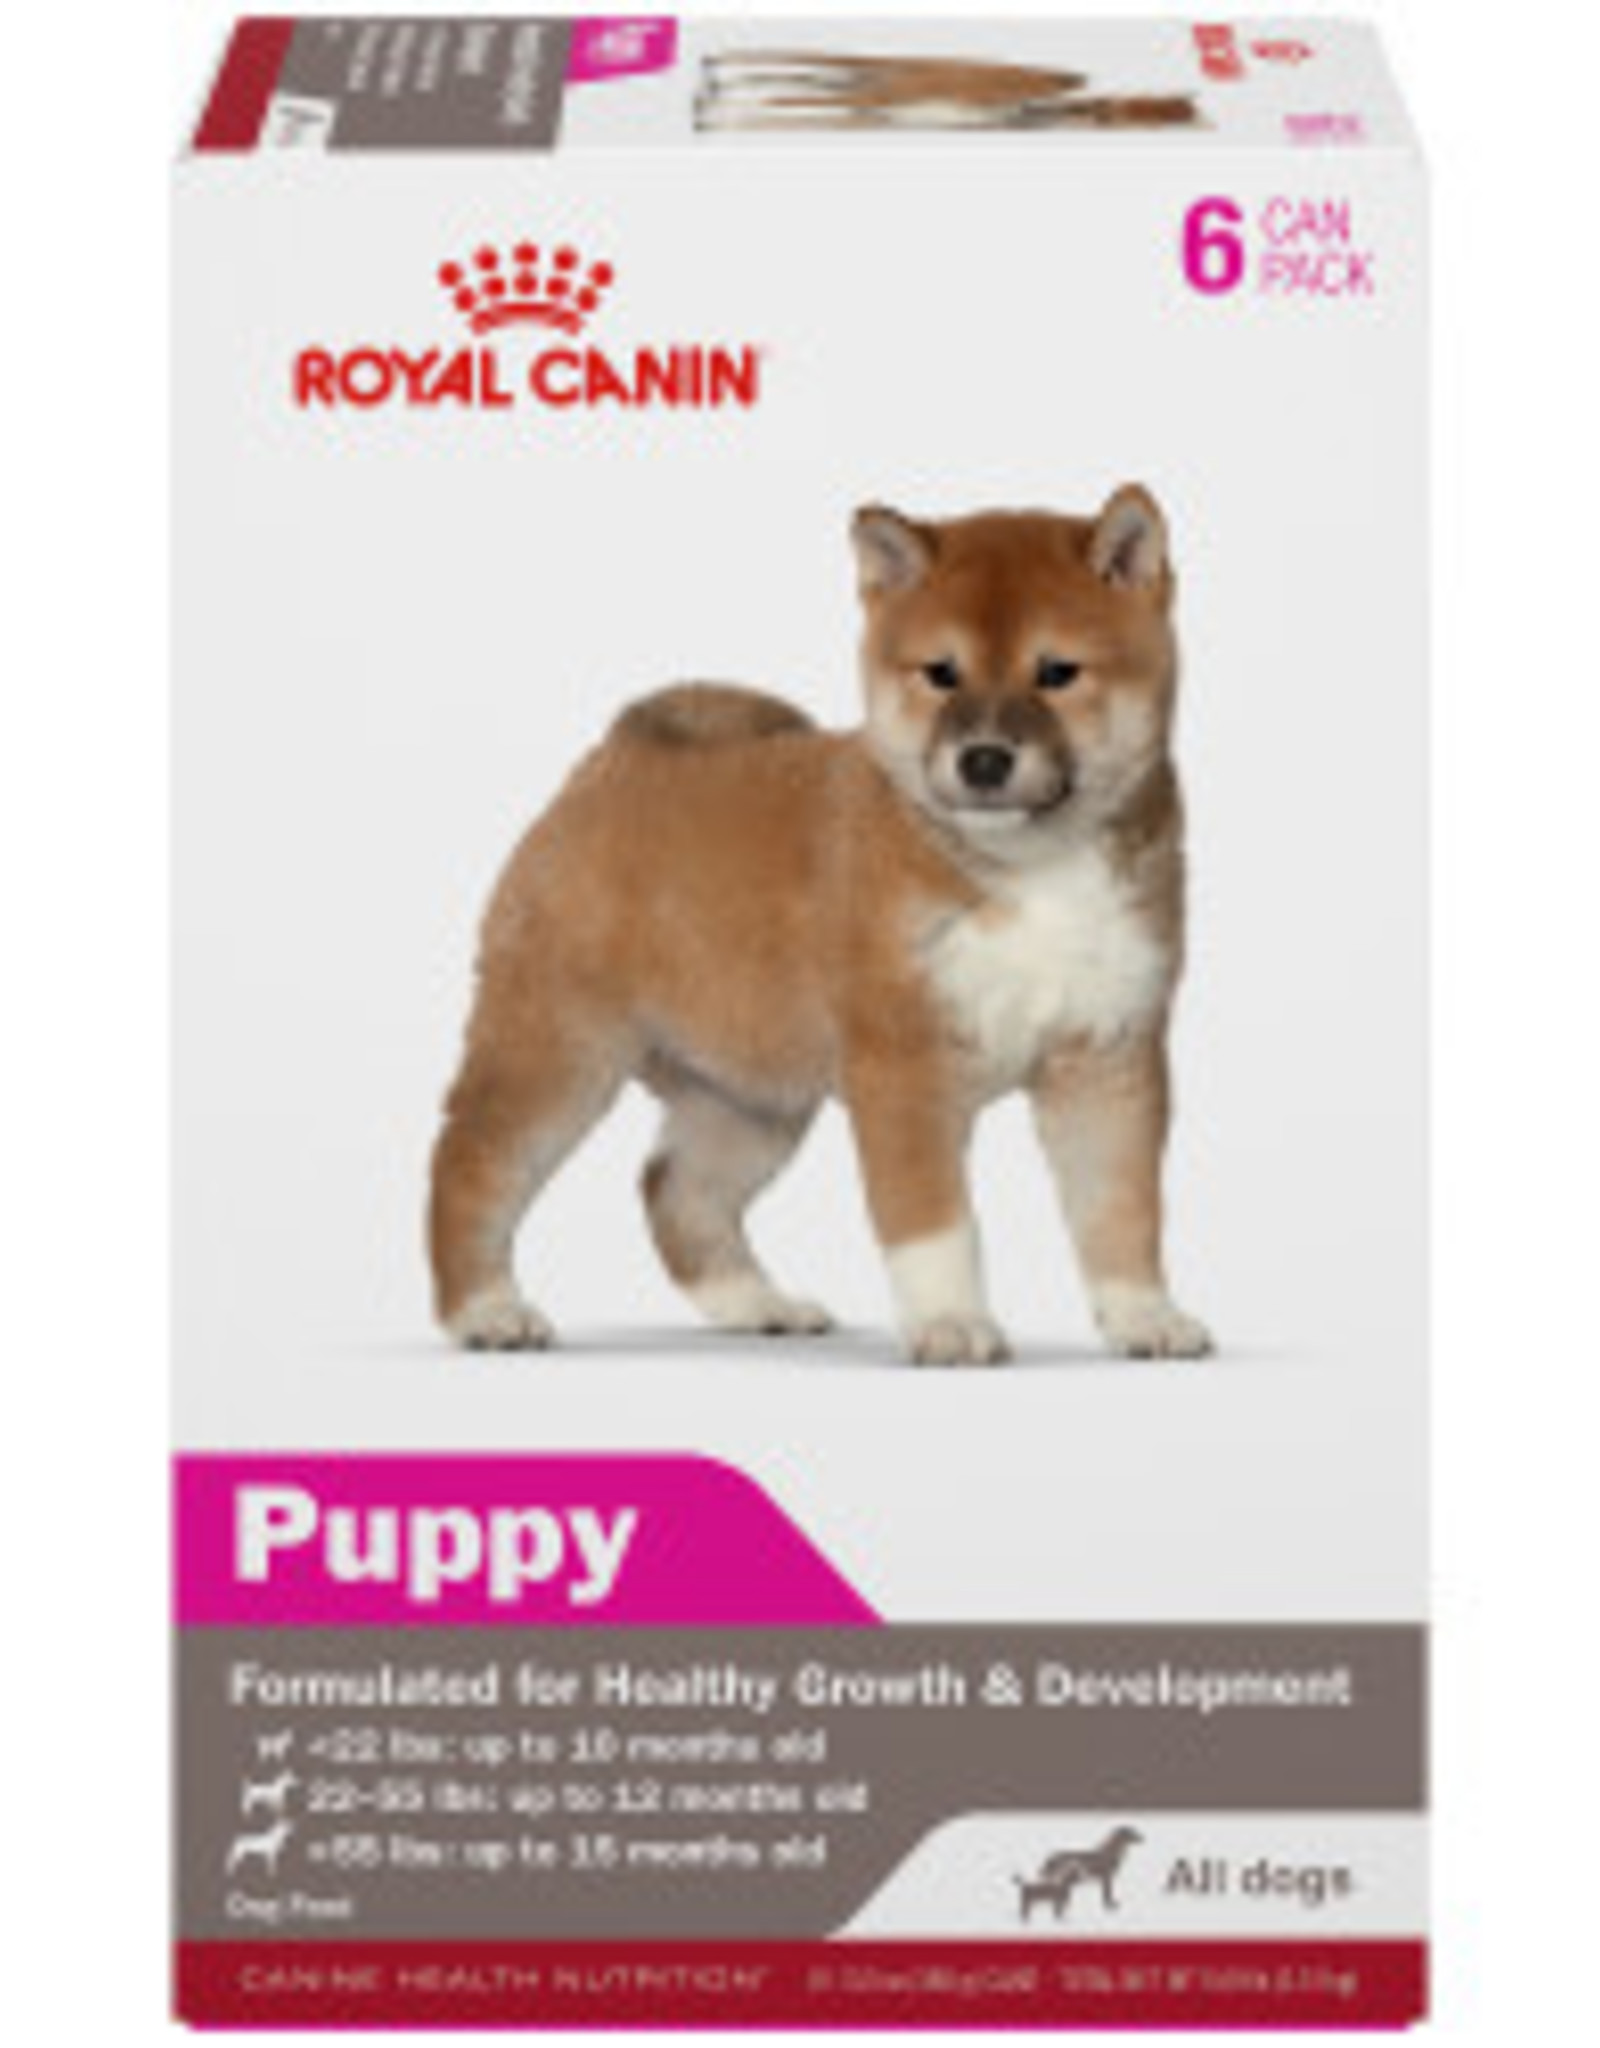 ROYAL CANIN ROYAL CANIN PUPPY CAN 13.56OZ CASE OF 12